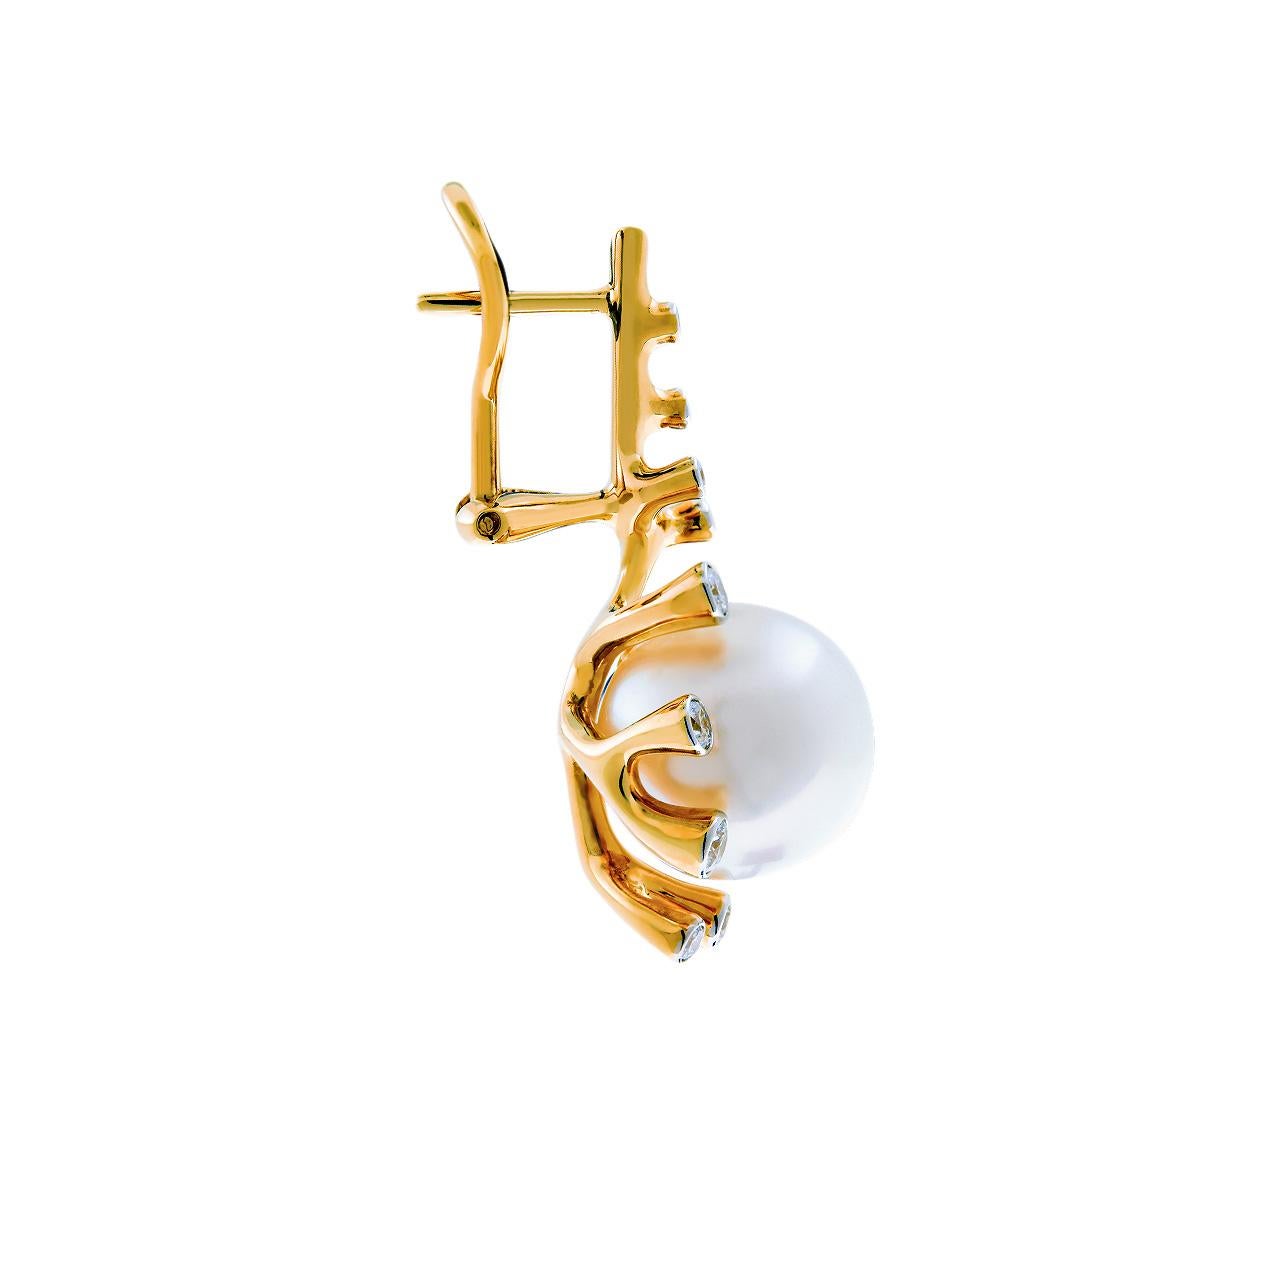 - 28 Round Diamonds - 0.80 ct, G/VVS1-VVS2
- 11.52 mm White South Sea pearls
- 18K Yellow Gold 
- Weight: 14.47 g
This pair of earrings from the Corals collection of Jewellery Theatre features two lustrous White South Sea pearls surrounded with gold